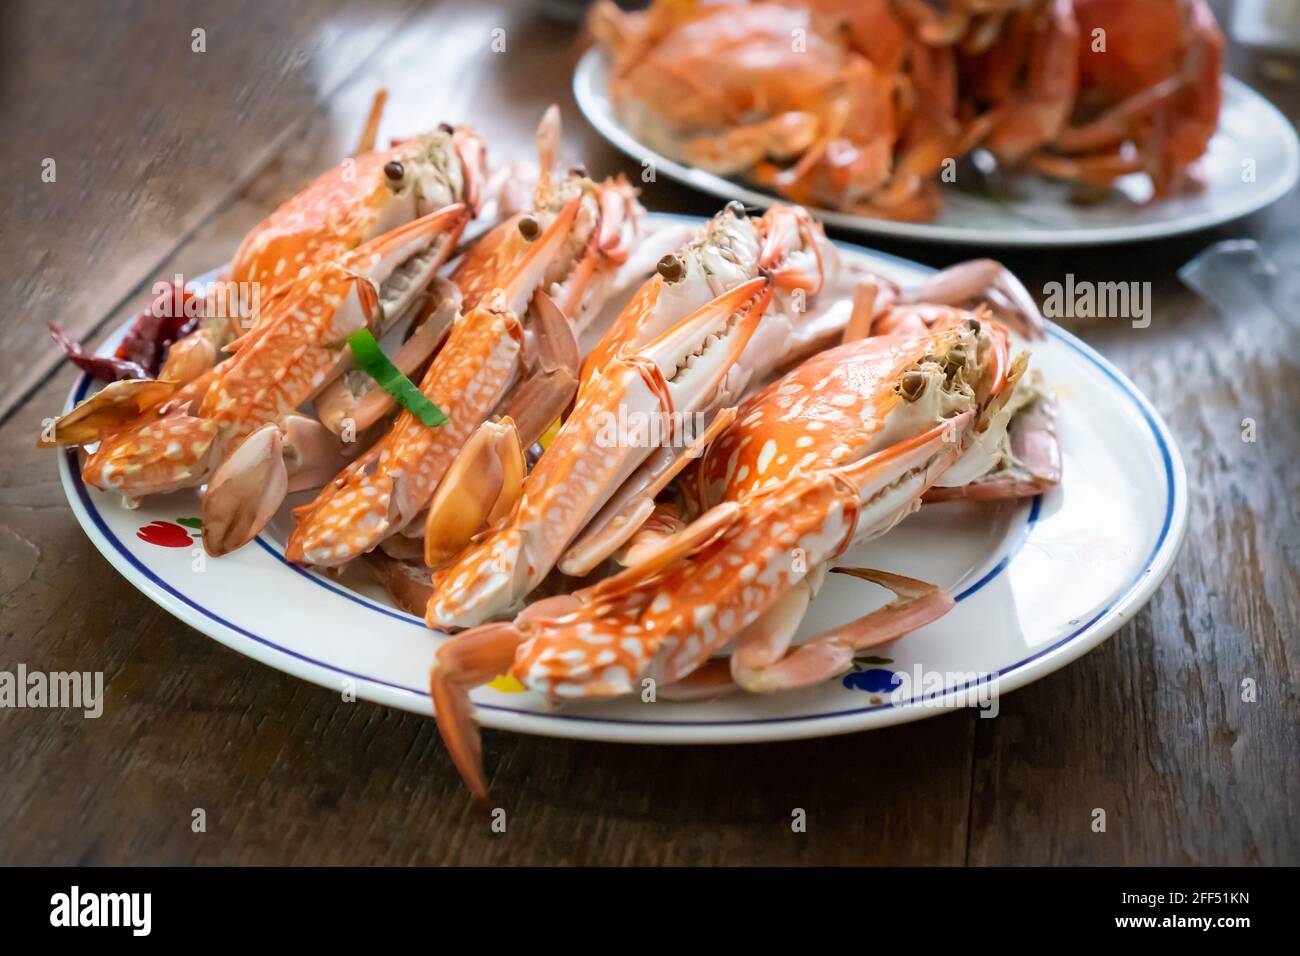 Top view Boiled Crabs and Shrimps in the white ceramic and glass dish on the vintage wooden table. Stock Photo